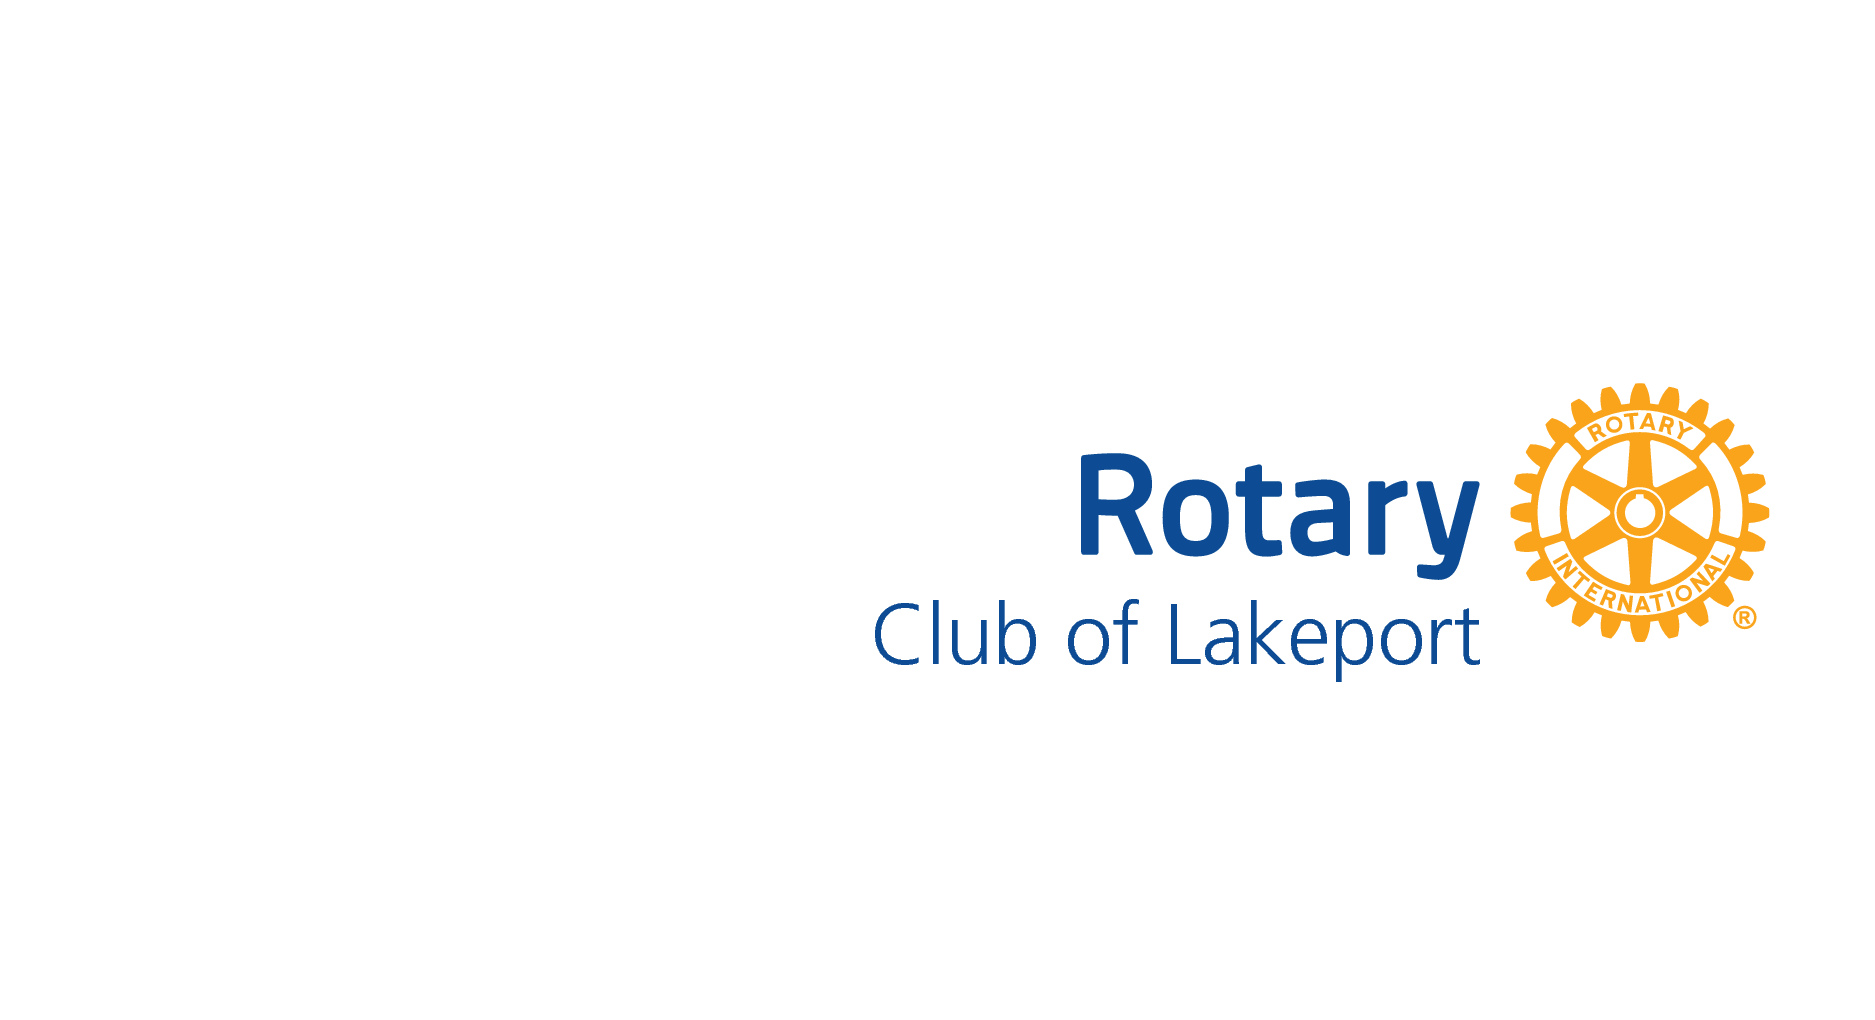 Rotary Club of Lakeport 